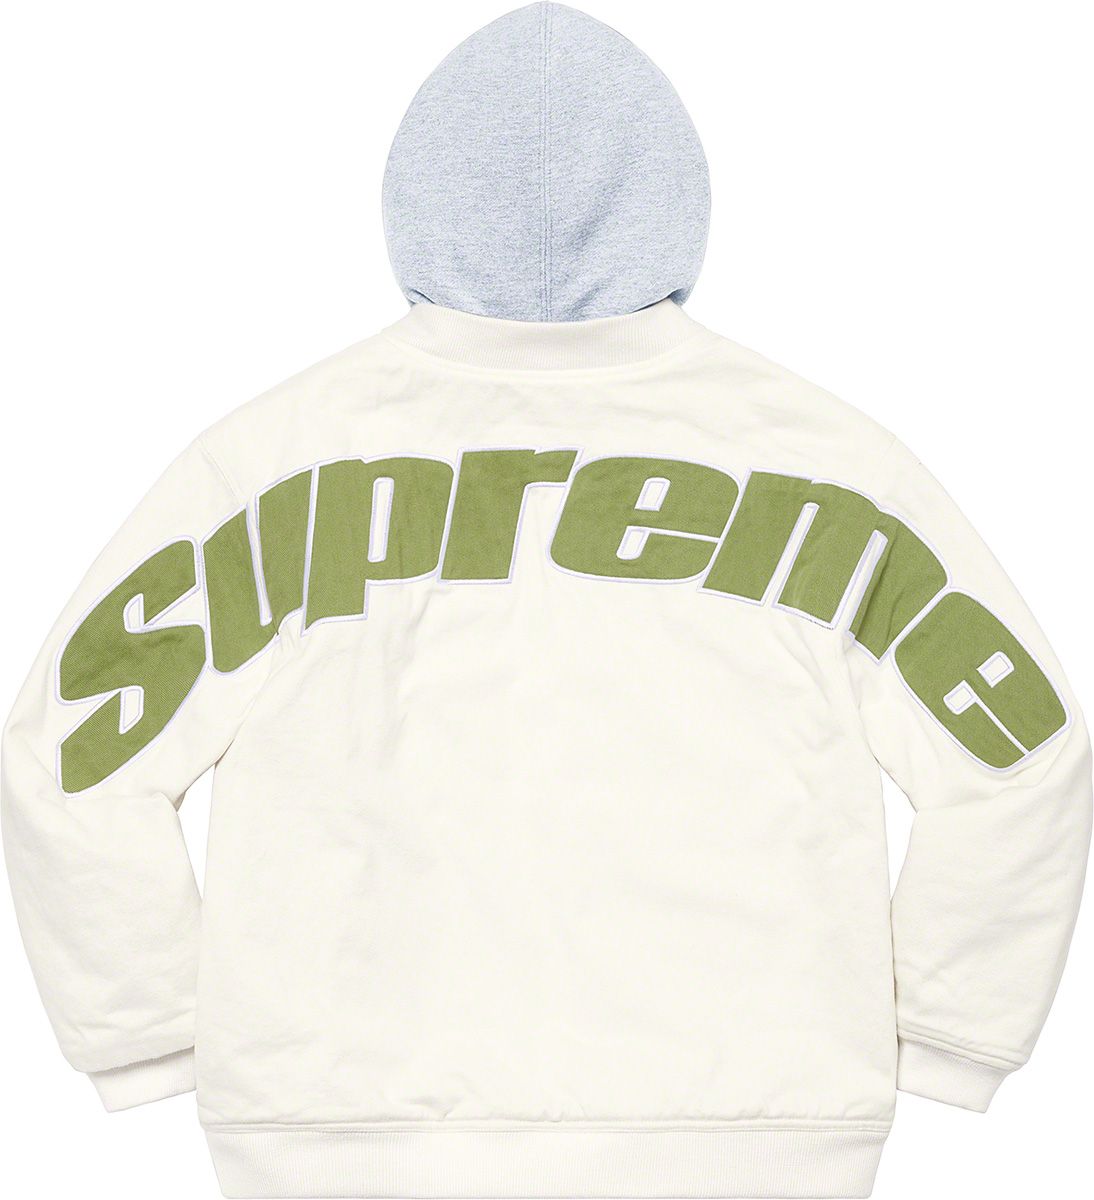 Supreme®/Mitchell & Ness® Quilted Sports Jacket - Spring/Summer 